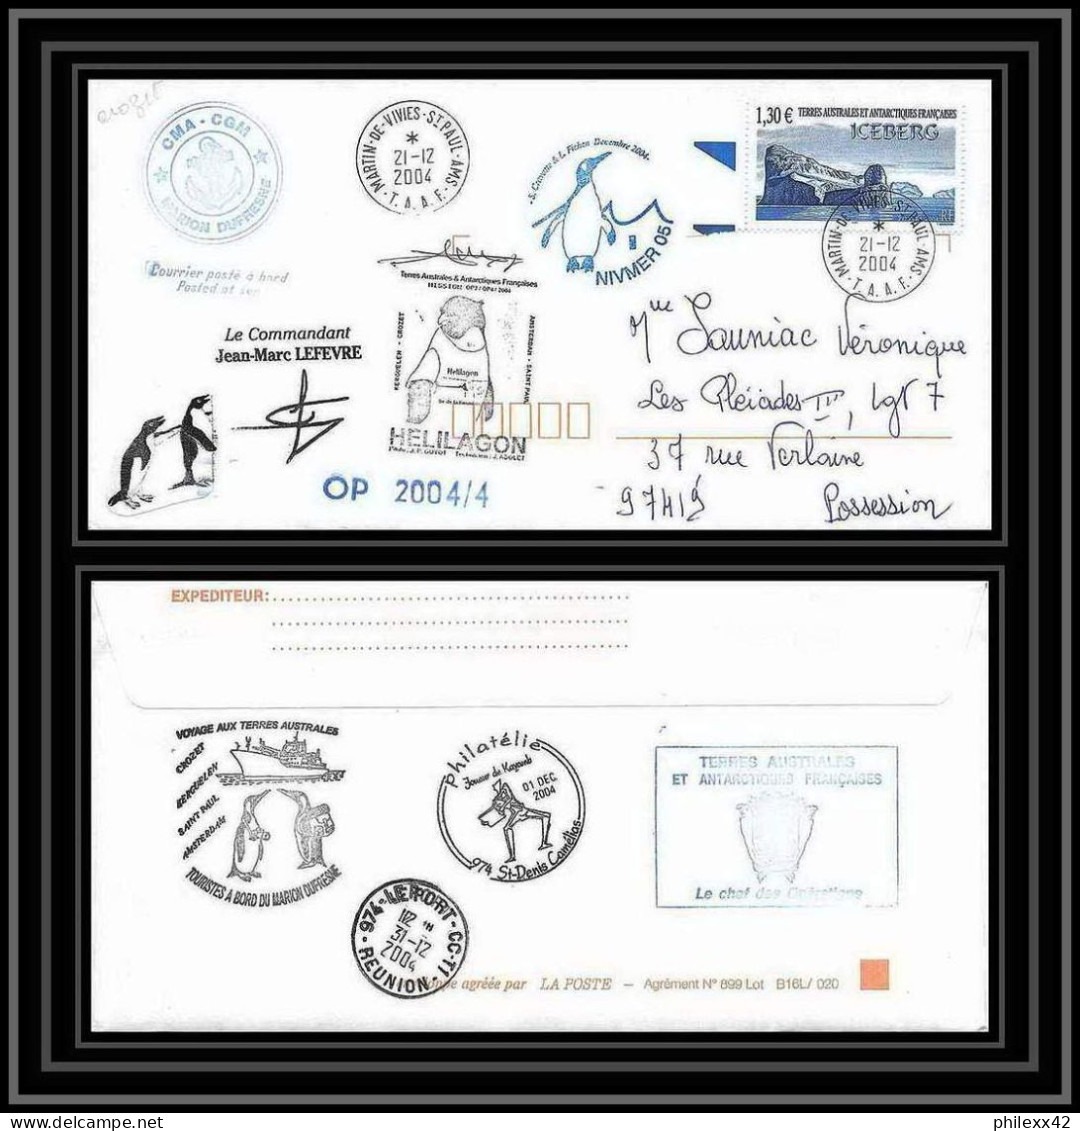 2485 ANTARCTIC Terres Australes TAAF Lettre Cover Dufresne 2 Signé Signed OP 2004/4 N°387 21/12/2004 Helilagon - Hélicoptères